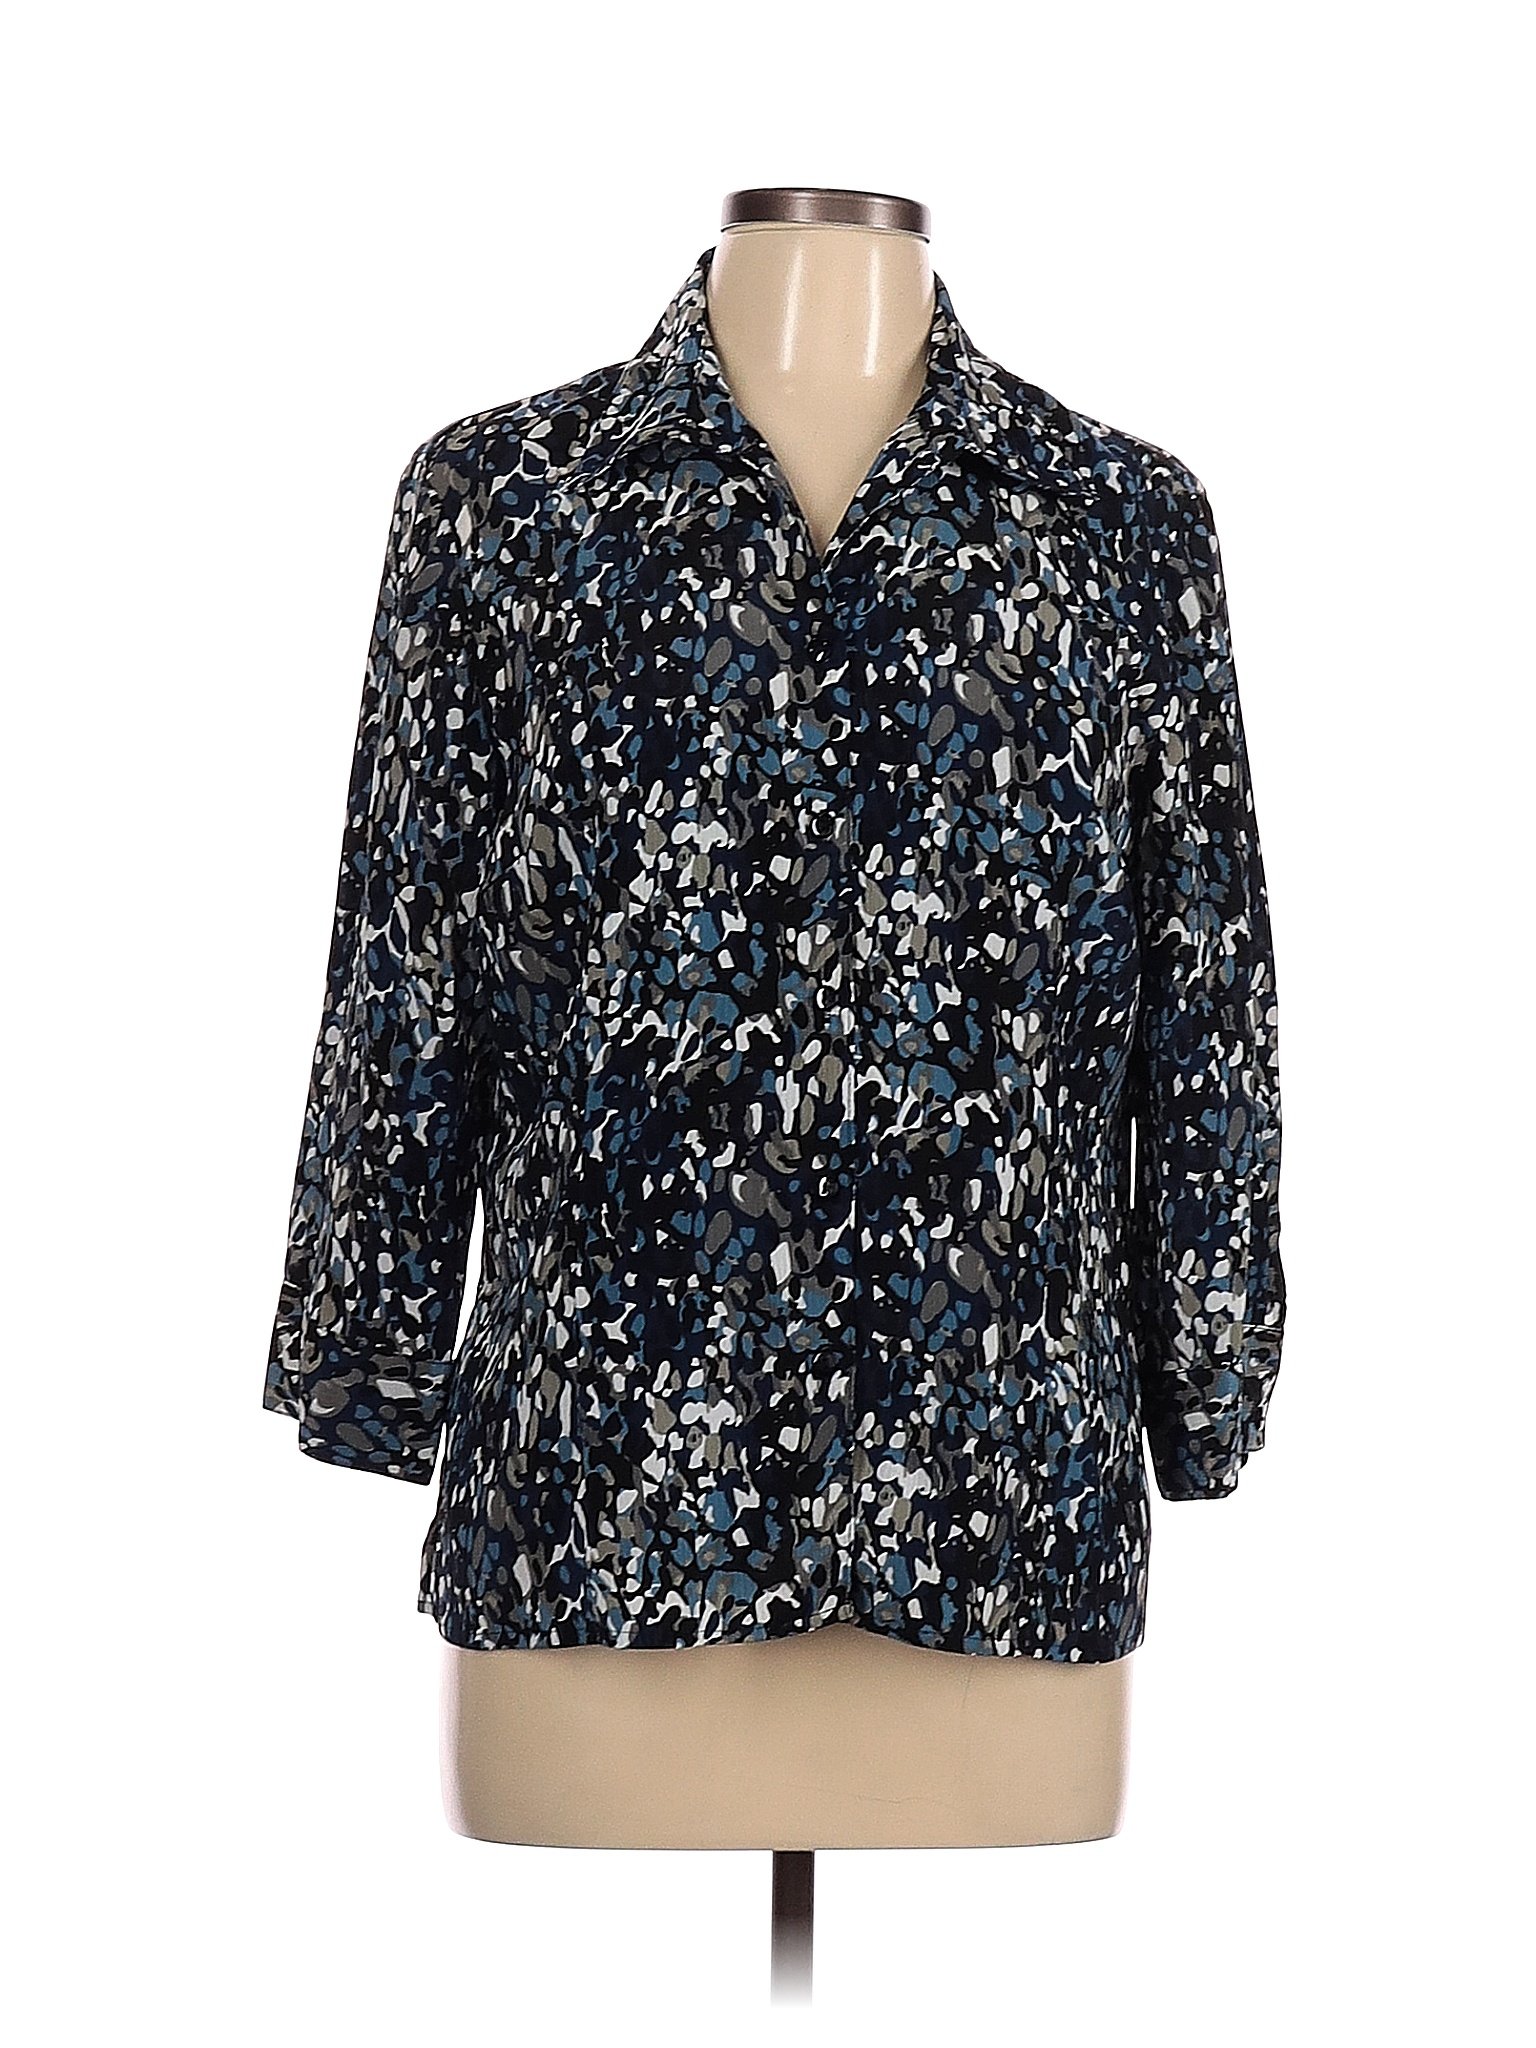 Notations 100% Polyester Black Blue 3/4 Sleeve Blouse Size L - 57% off ...